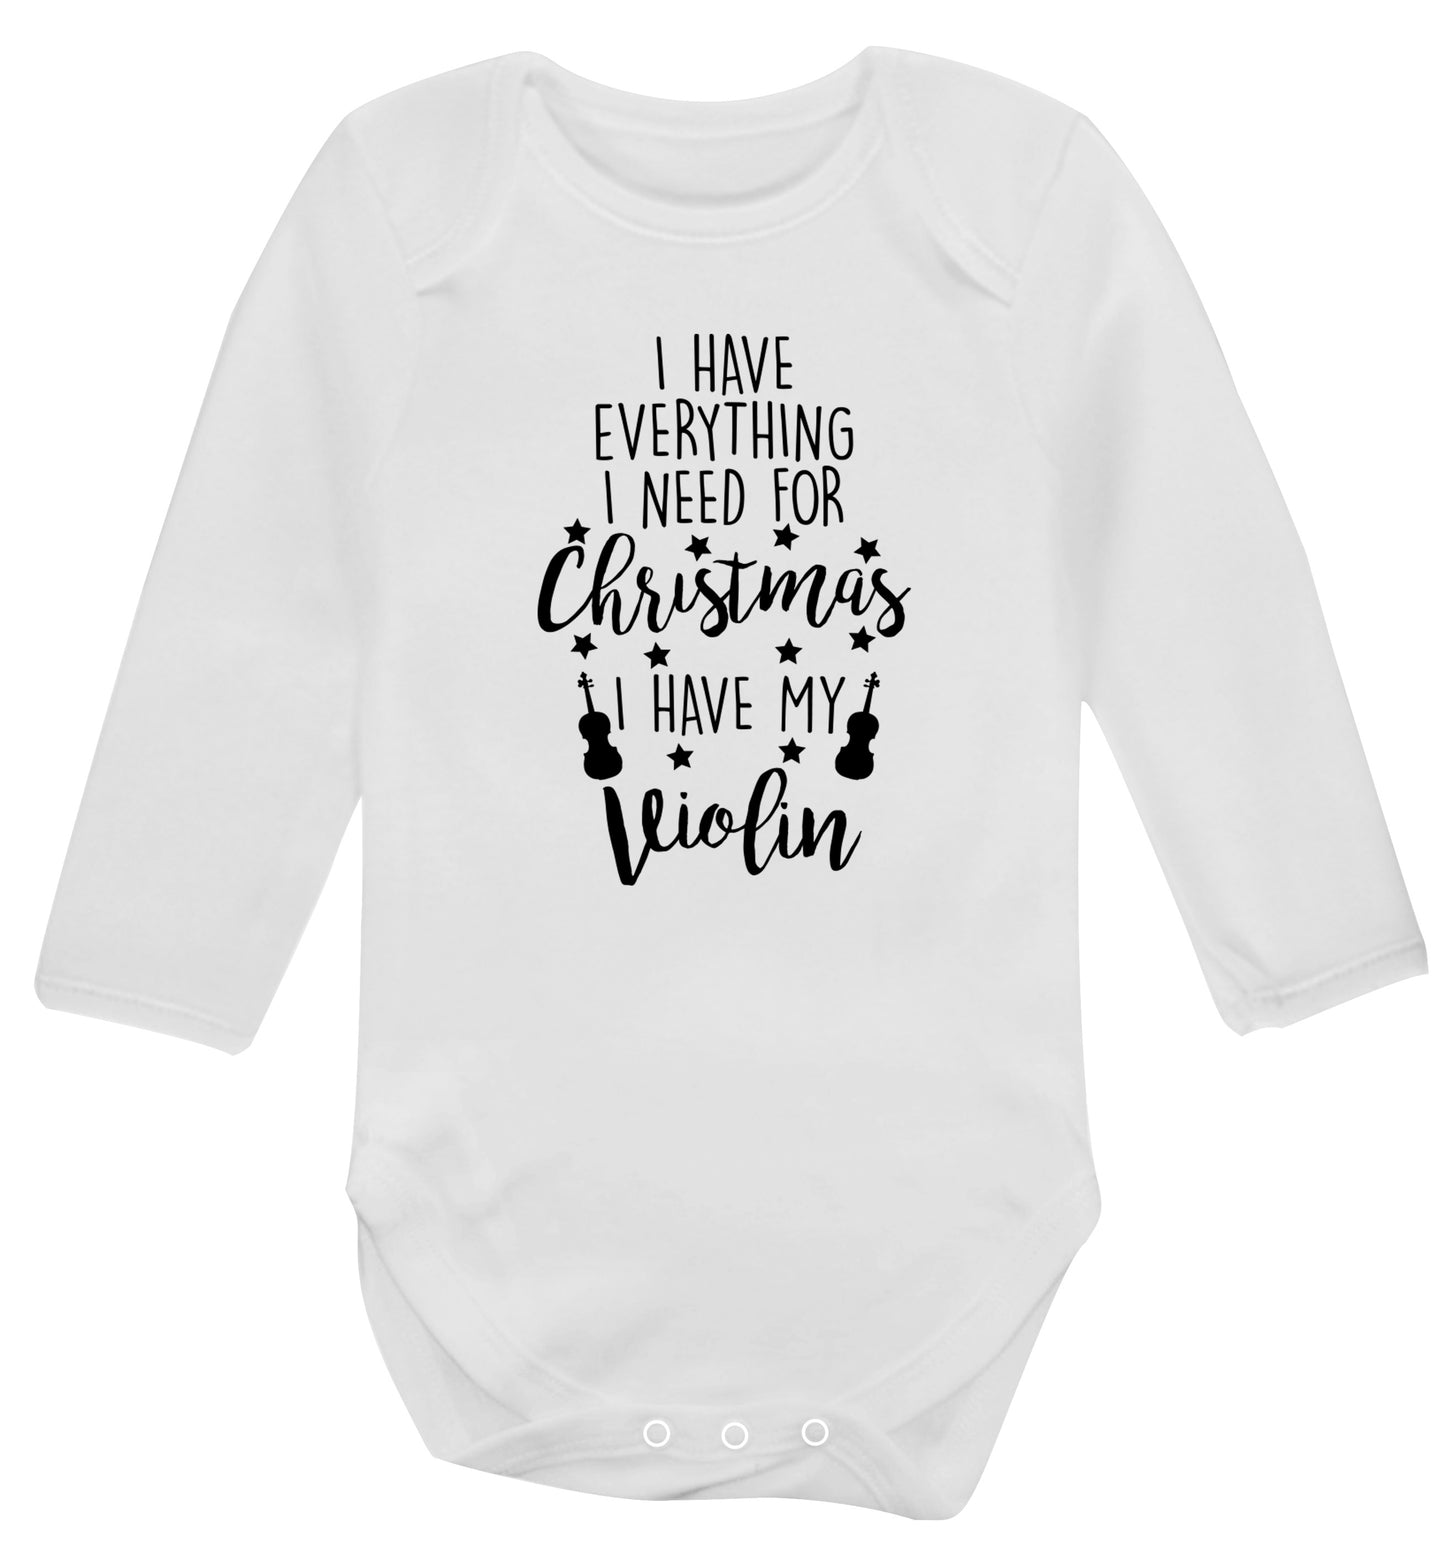 I have everything I need for Christmas I have my violin Baby Vest long sleeved white 6-12 months